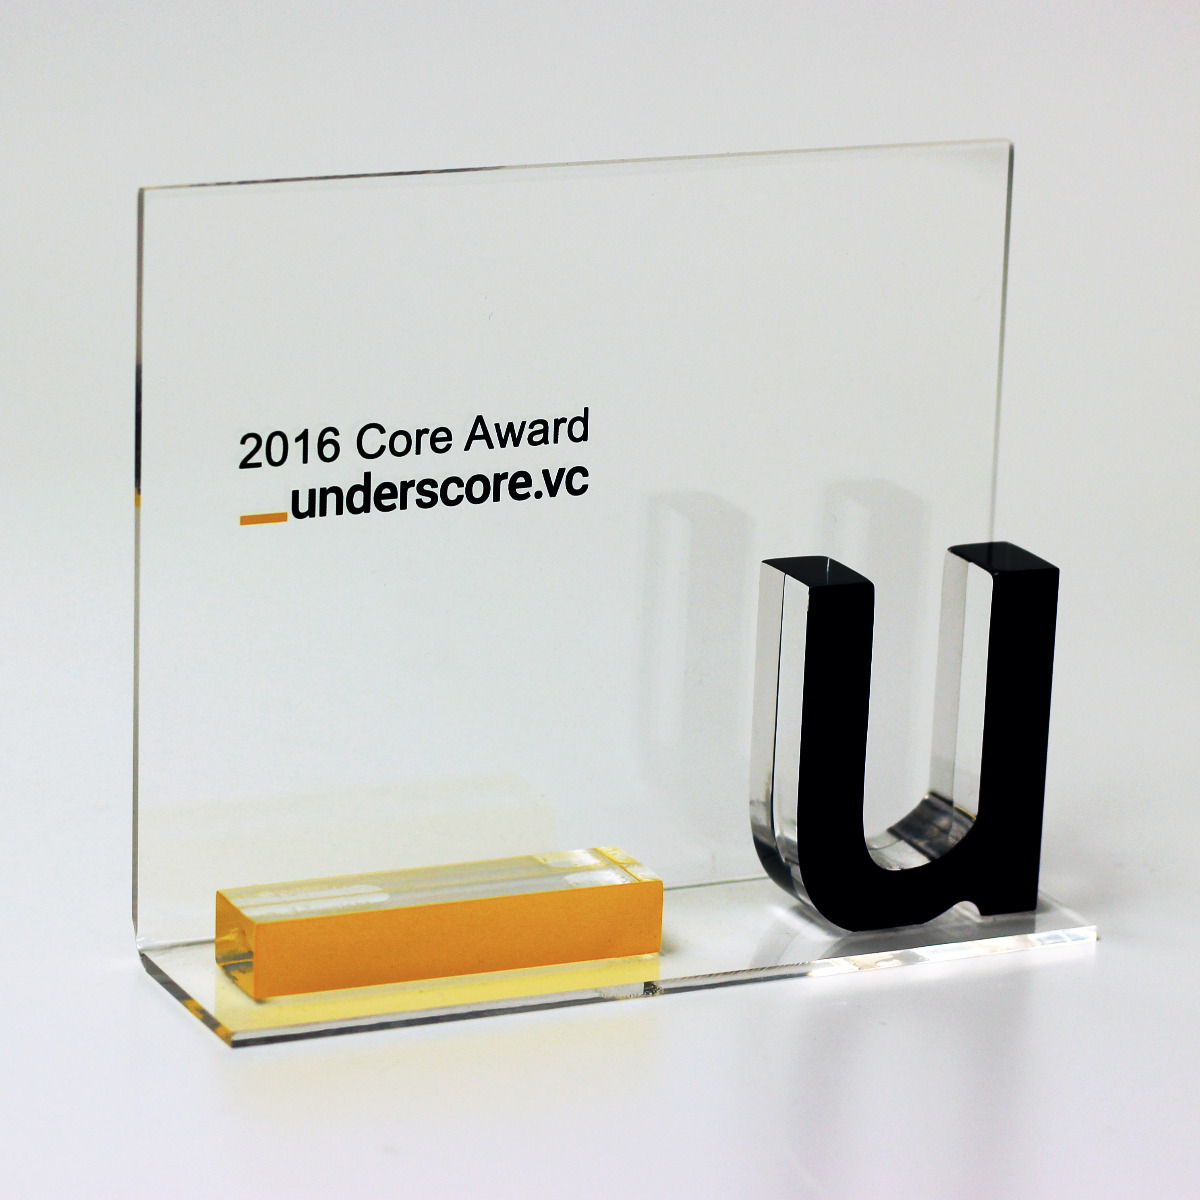 Custom shaped award or display with underscore as a theme